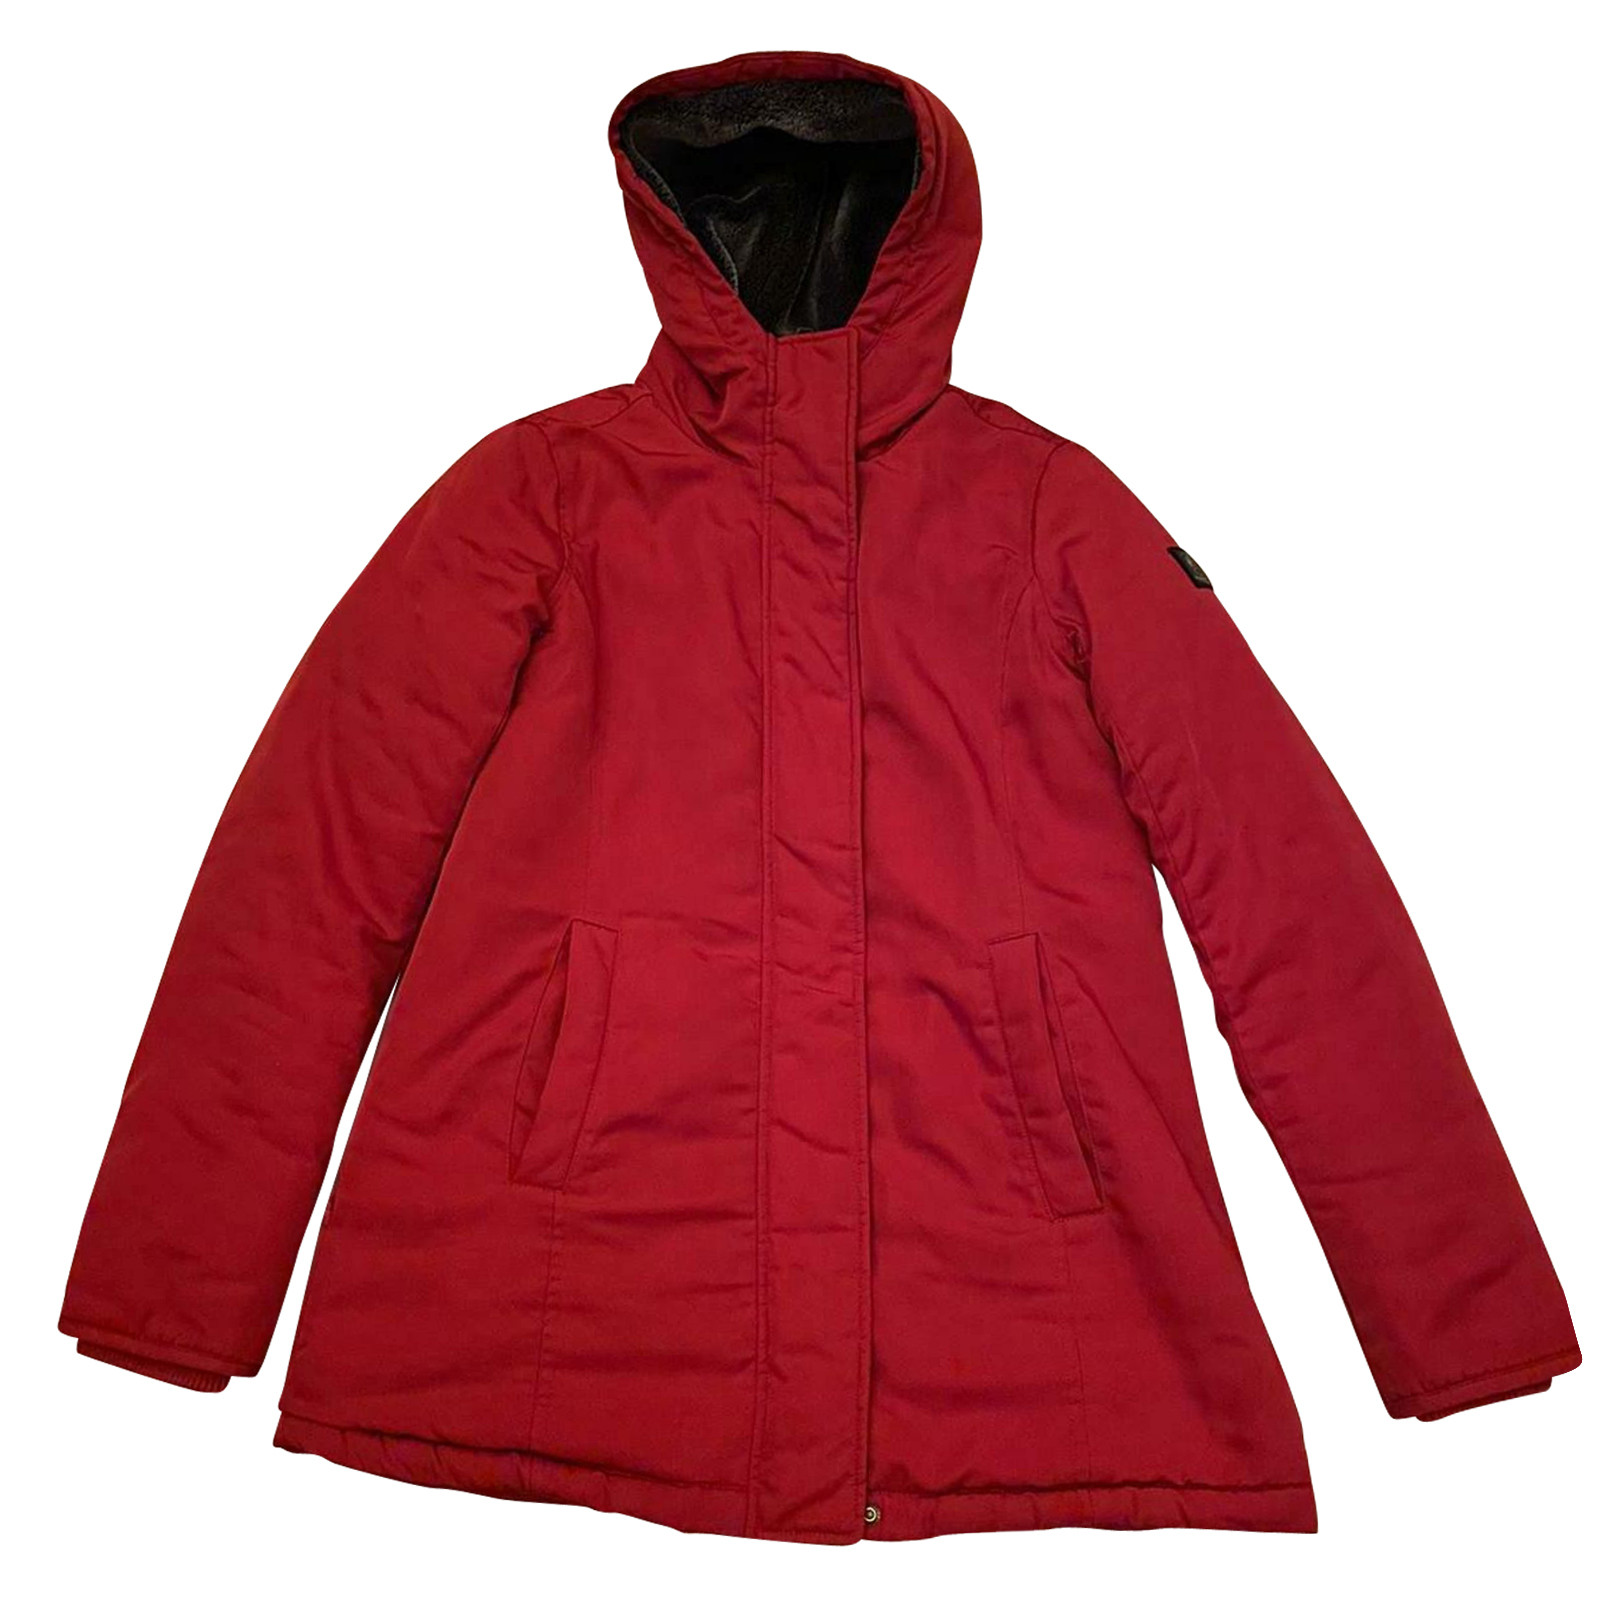 Refrigue Jacket/Coat in Red - Second Hand Refrigue Jacket/Coat in Red buy  used for 130€ (5011587)